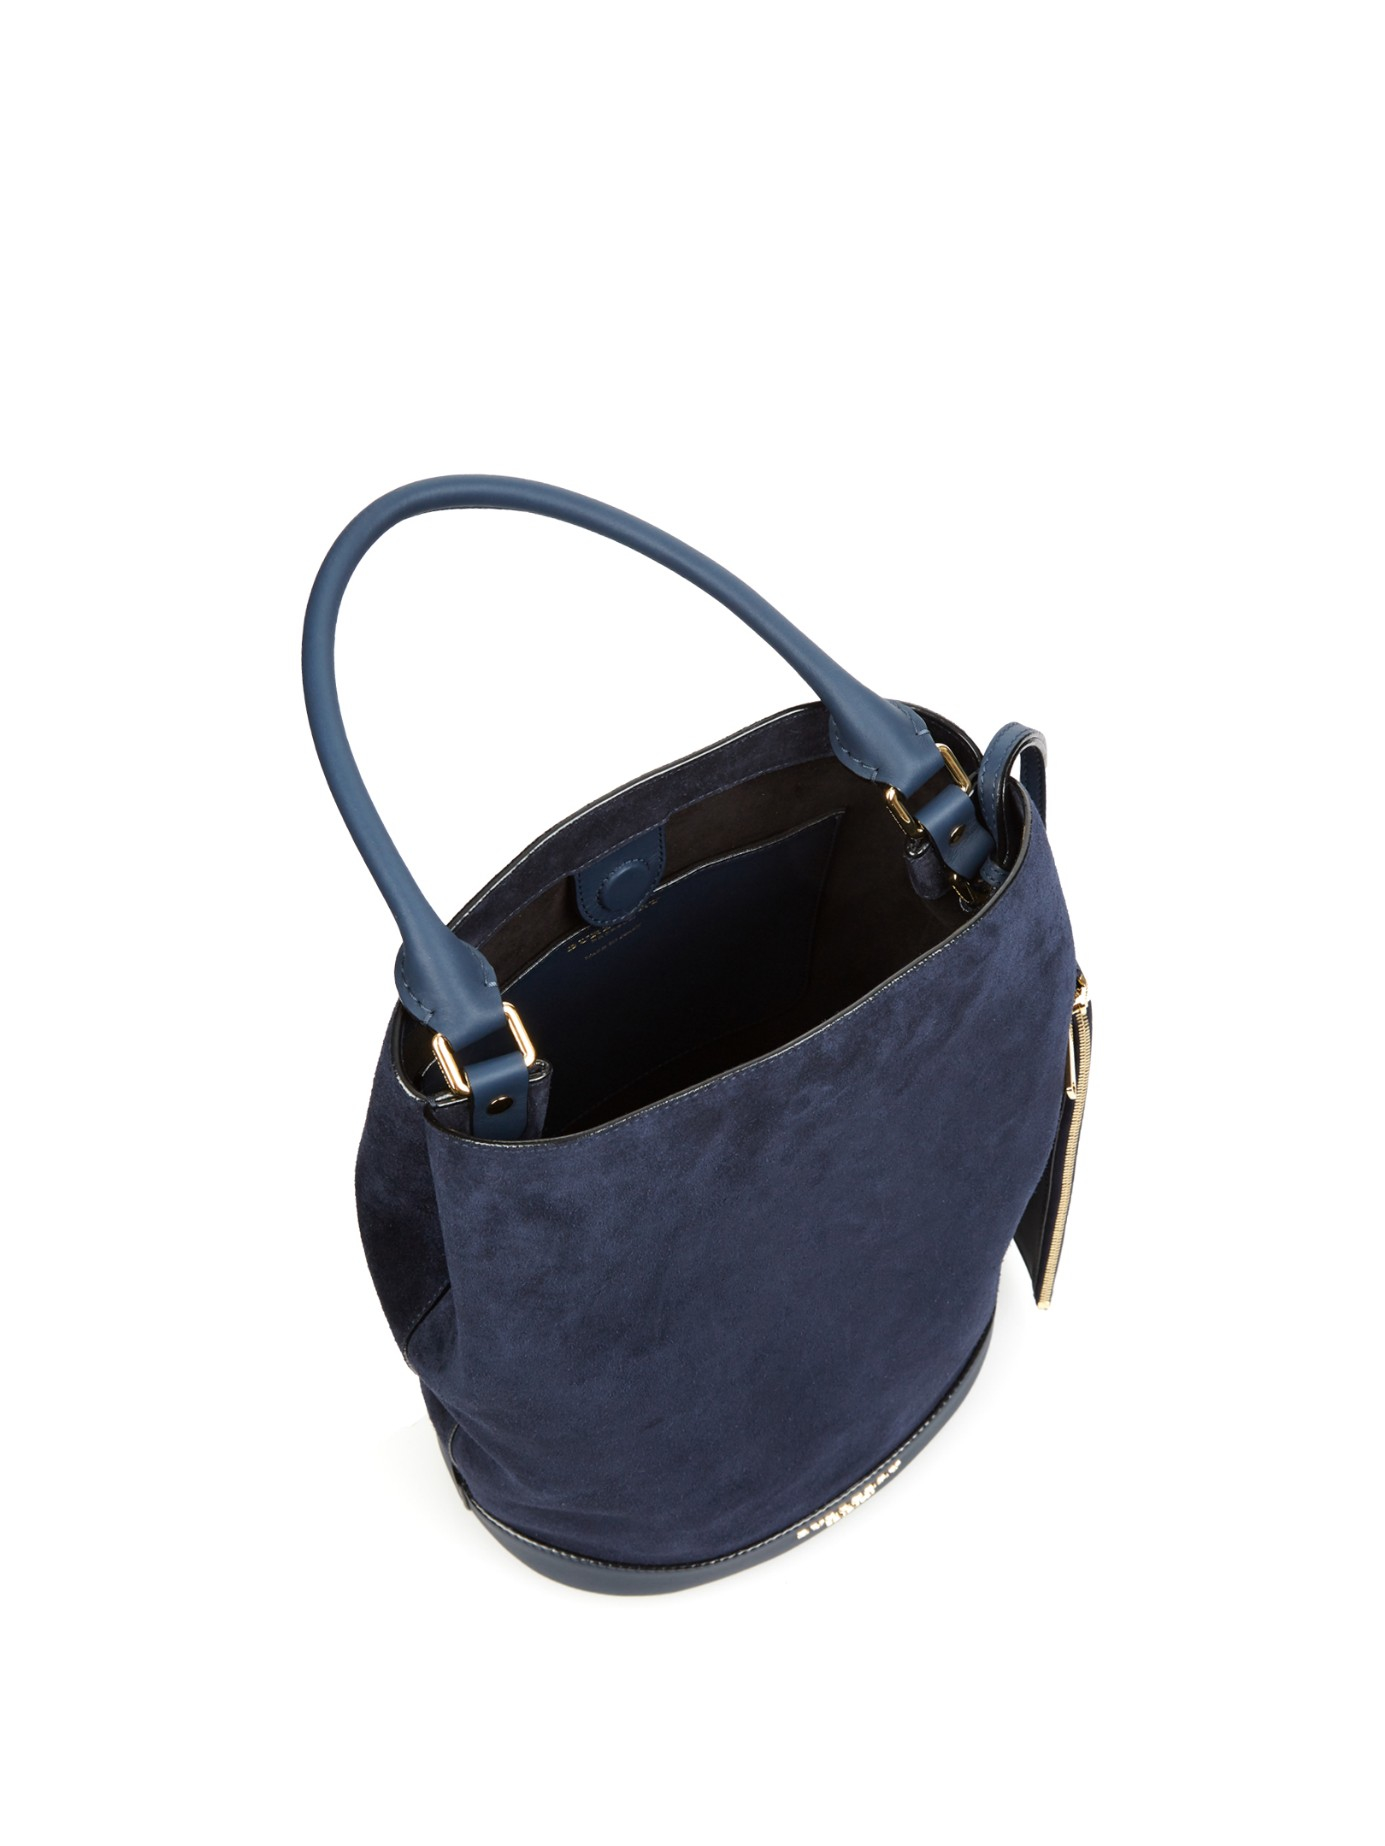 Lyst - Burberry prorsum Suede And Leather Bucket Bag in Blue